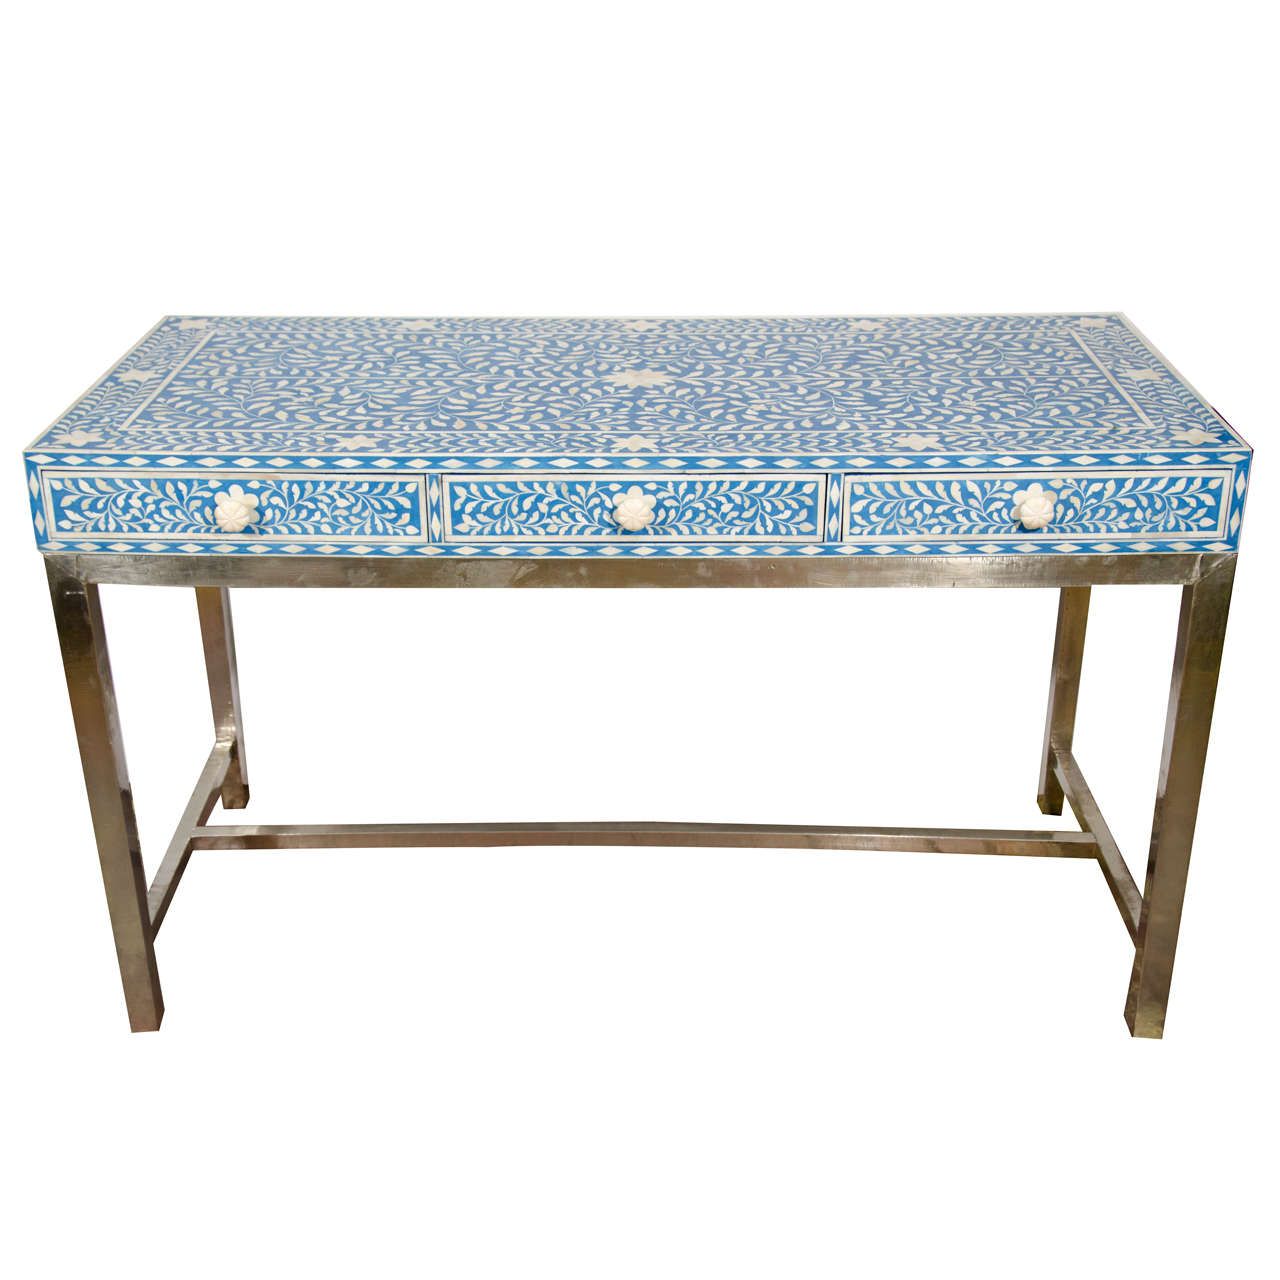 Gold And Blue Writing Desks In Most Current Indian Bone Inlay Blue And White Writing Desk With White Metal Base At (View 11 of 15)